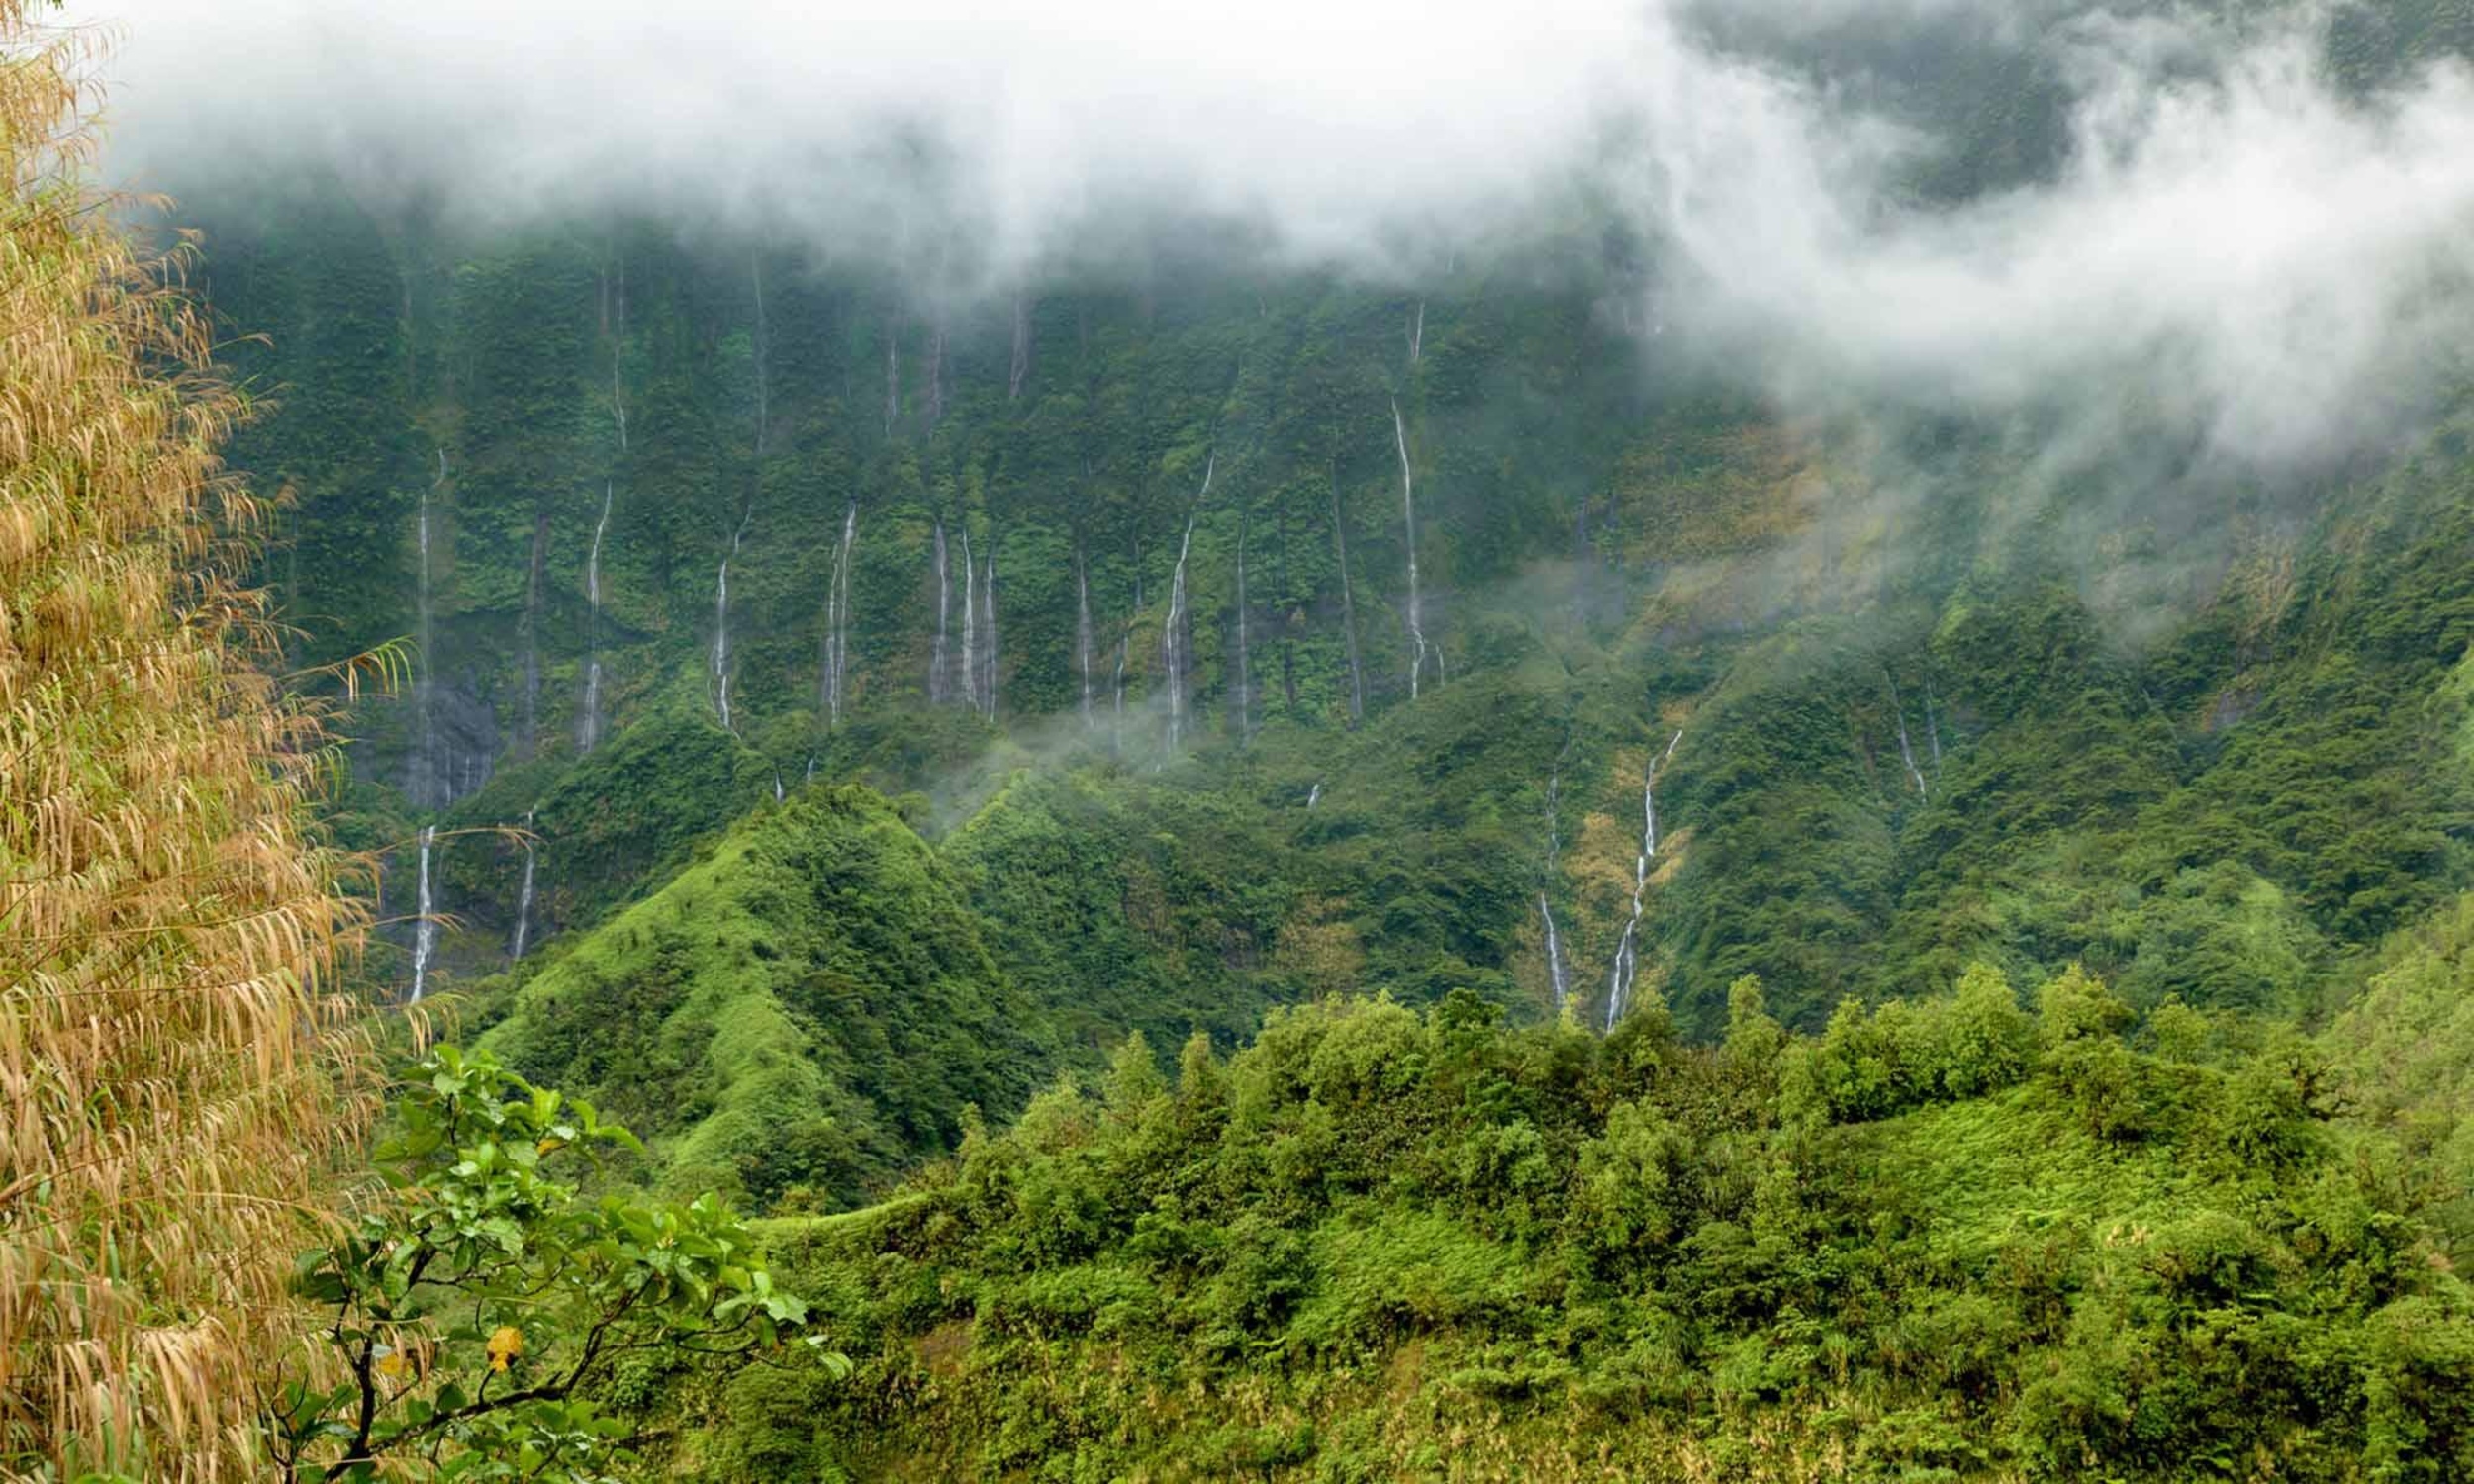 <p>The tropical rainfall of Tahiti causes the hills to weep. Cascading waterfalls rain down from the jungle like tears running down your cheek. Except these aren't sad tears. No need to grab the bucket of ice cream. The waterfalls of Papenoo will bring a smile to your face and remind you why you're in Tahiti.</p><p>You may also like: <a href='https://www.yardbarker.com/lifestyle/articles/21_foods_that_surprisingly_taste_better_frozen_031224/s1__37739637'>21 foods that surprisingly taste better frozen</a></p>